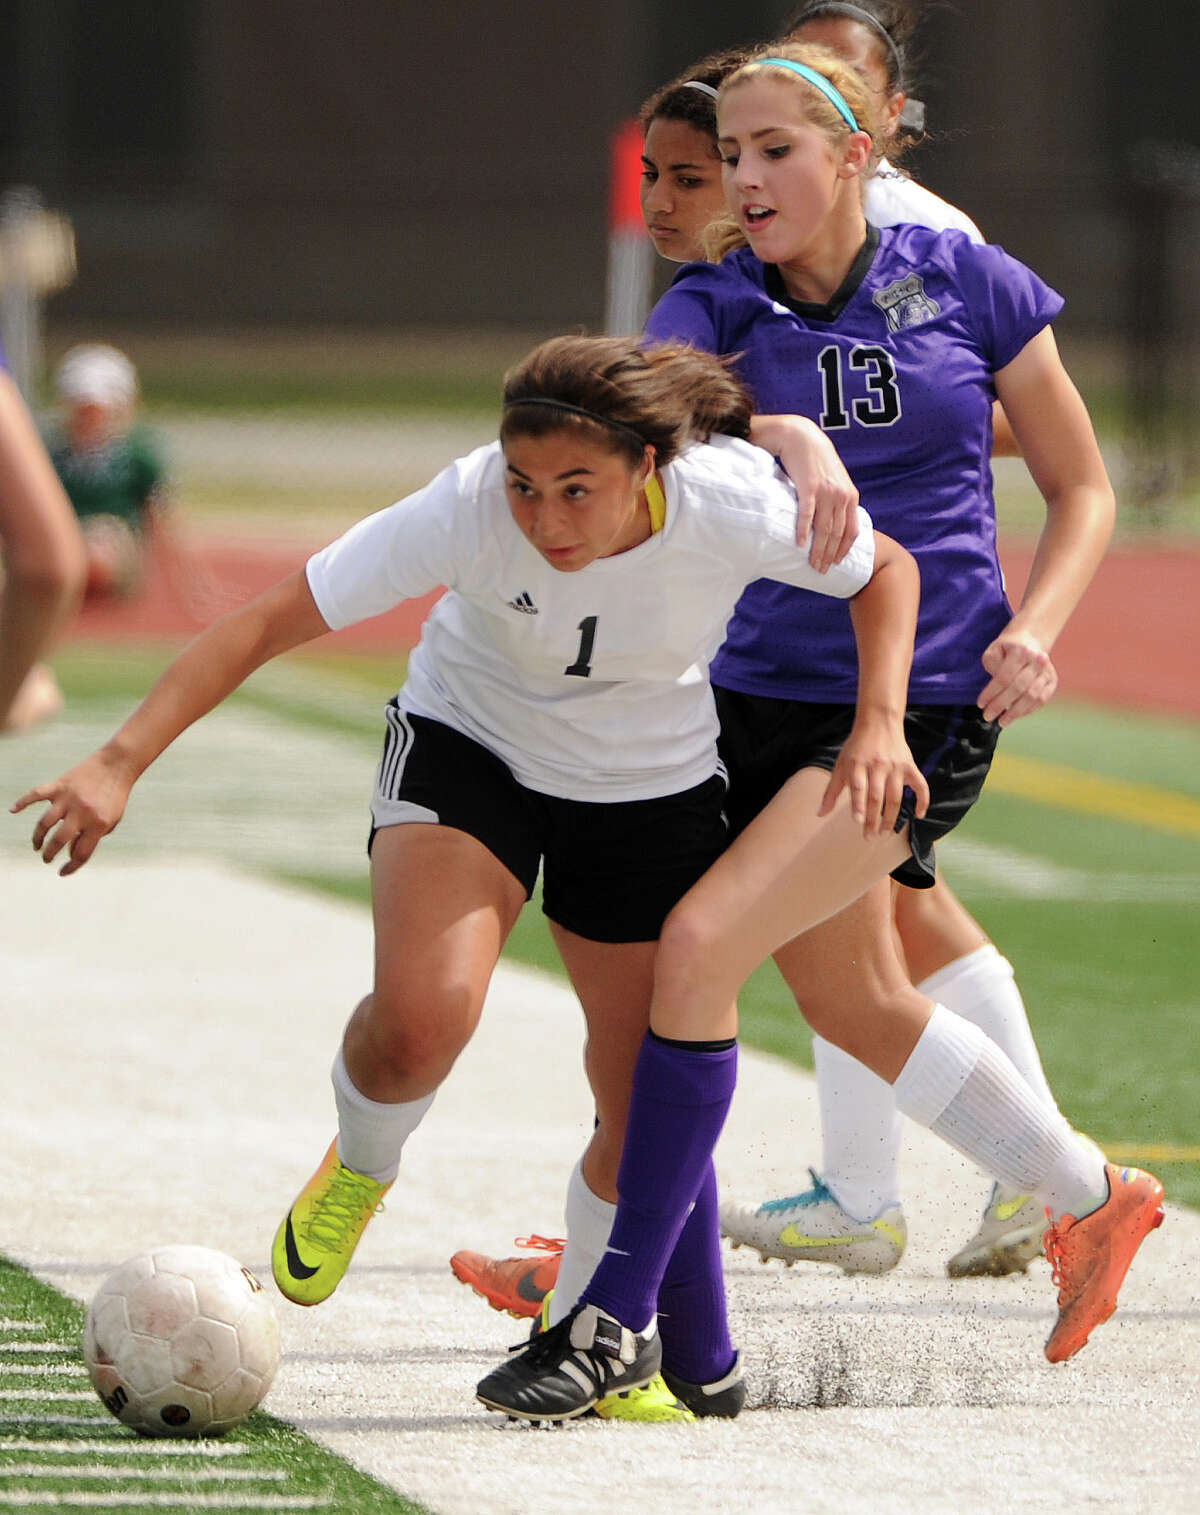 Spring Woods' Natalie Elizondo (1) advances the ball past College Station's Lexi Bullard during the first half of a 4A Region III semifinal high school soccer playoff game, Friday, April 11, 2014, at Turner Stadium in Humble.